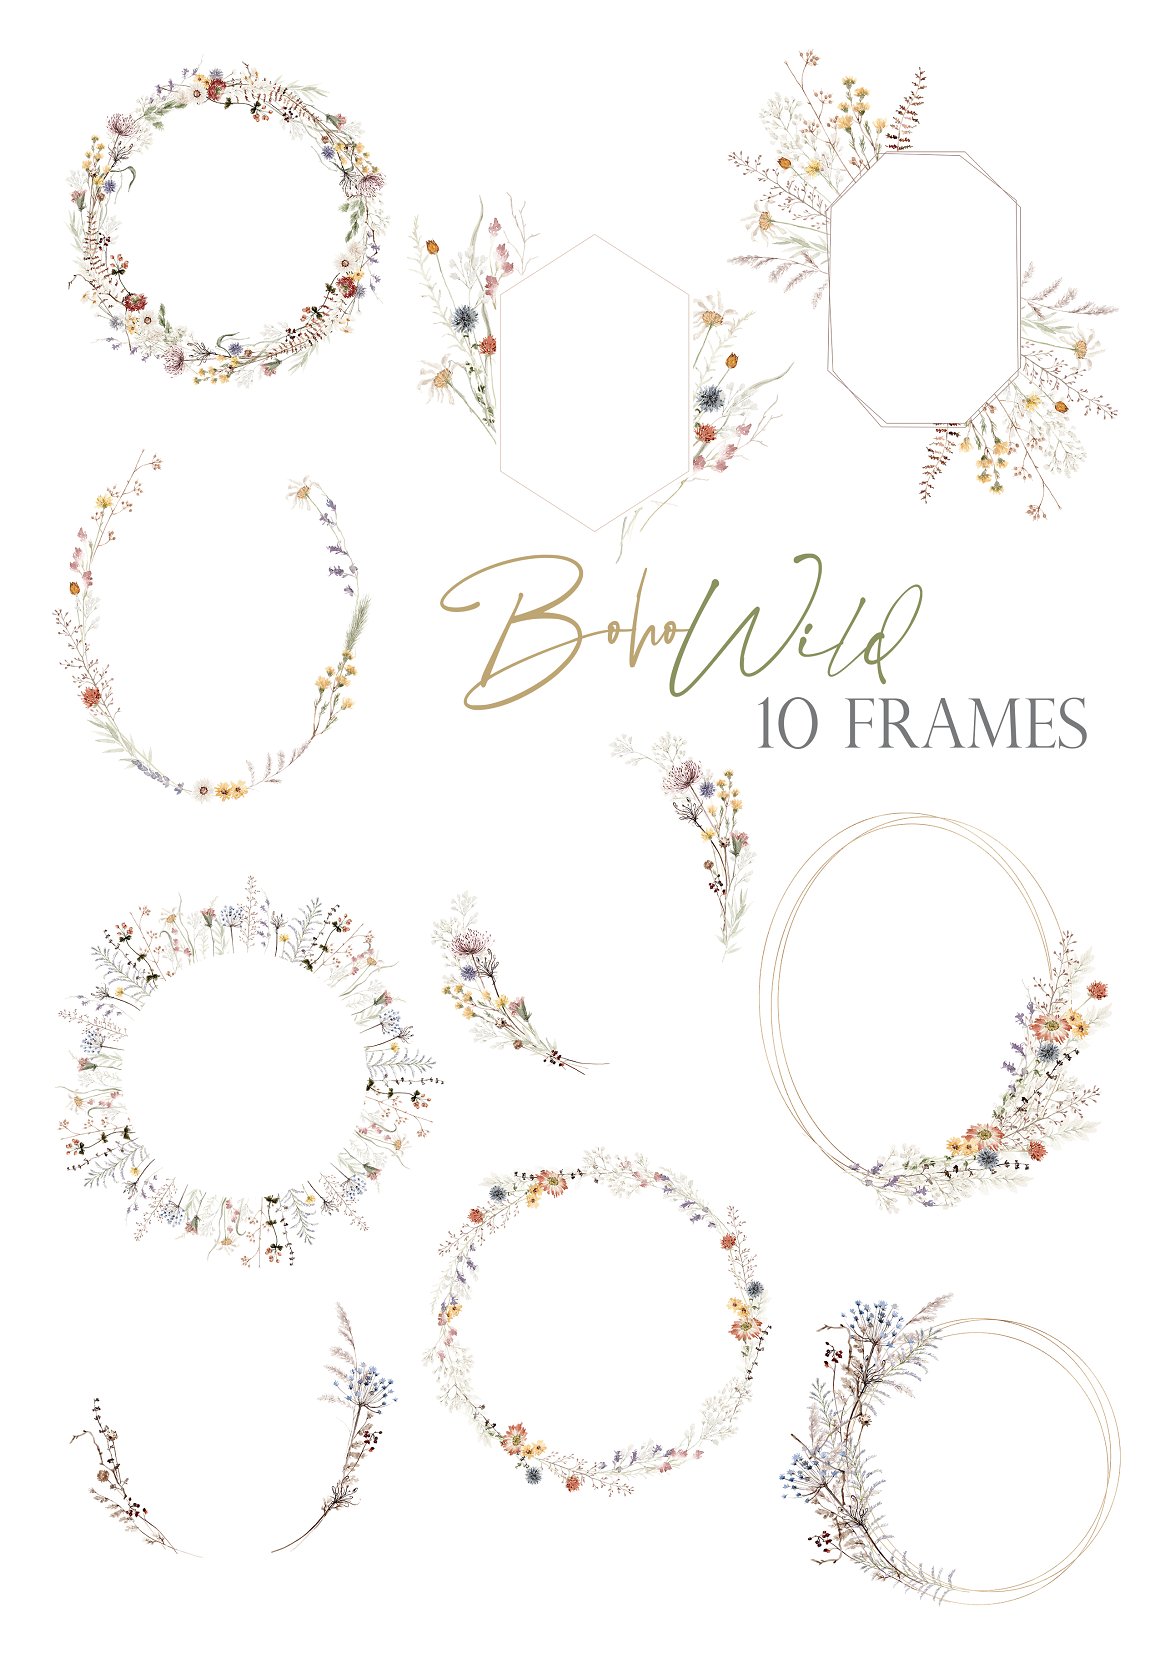 A set of 10 different floral frames on a white background.